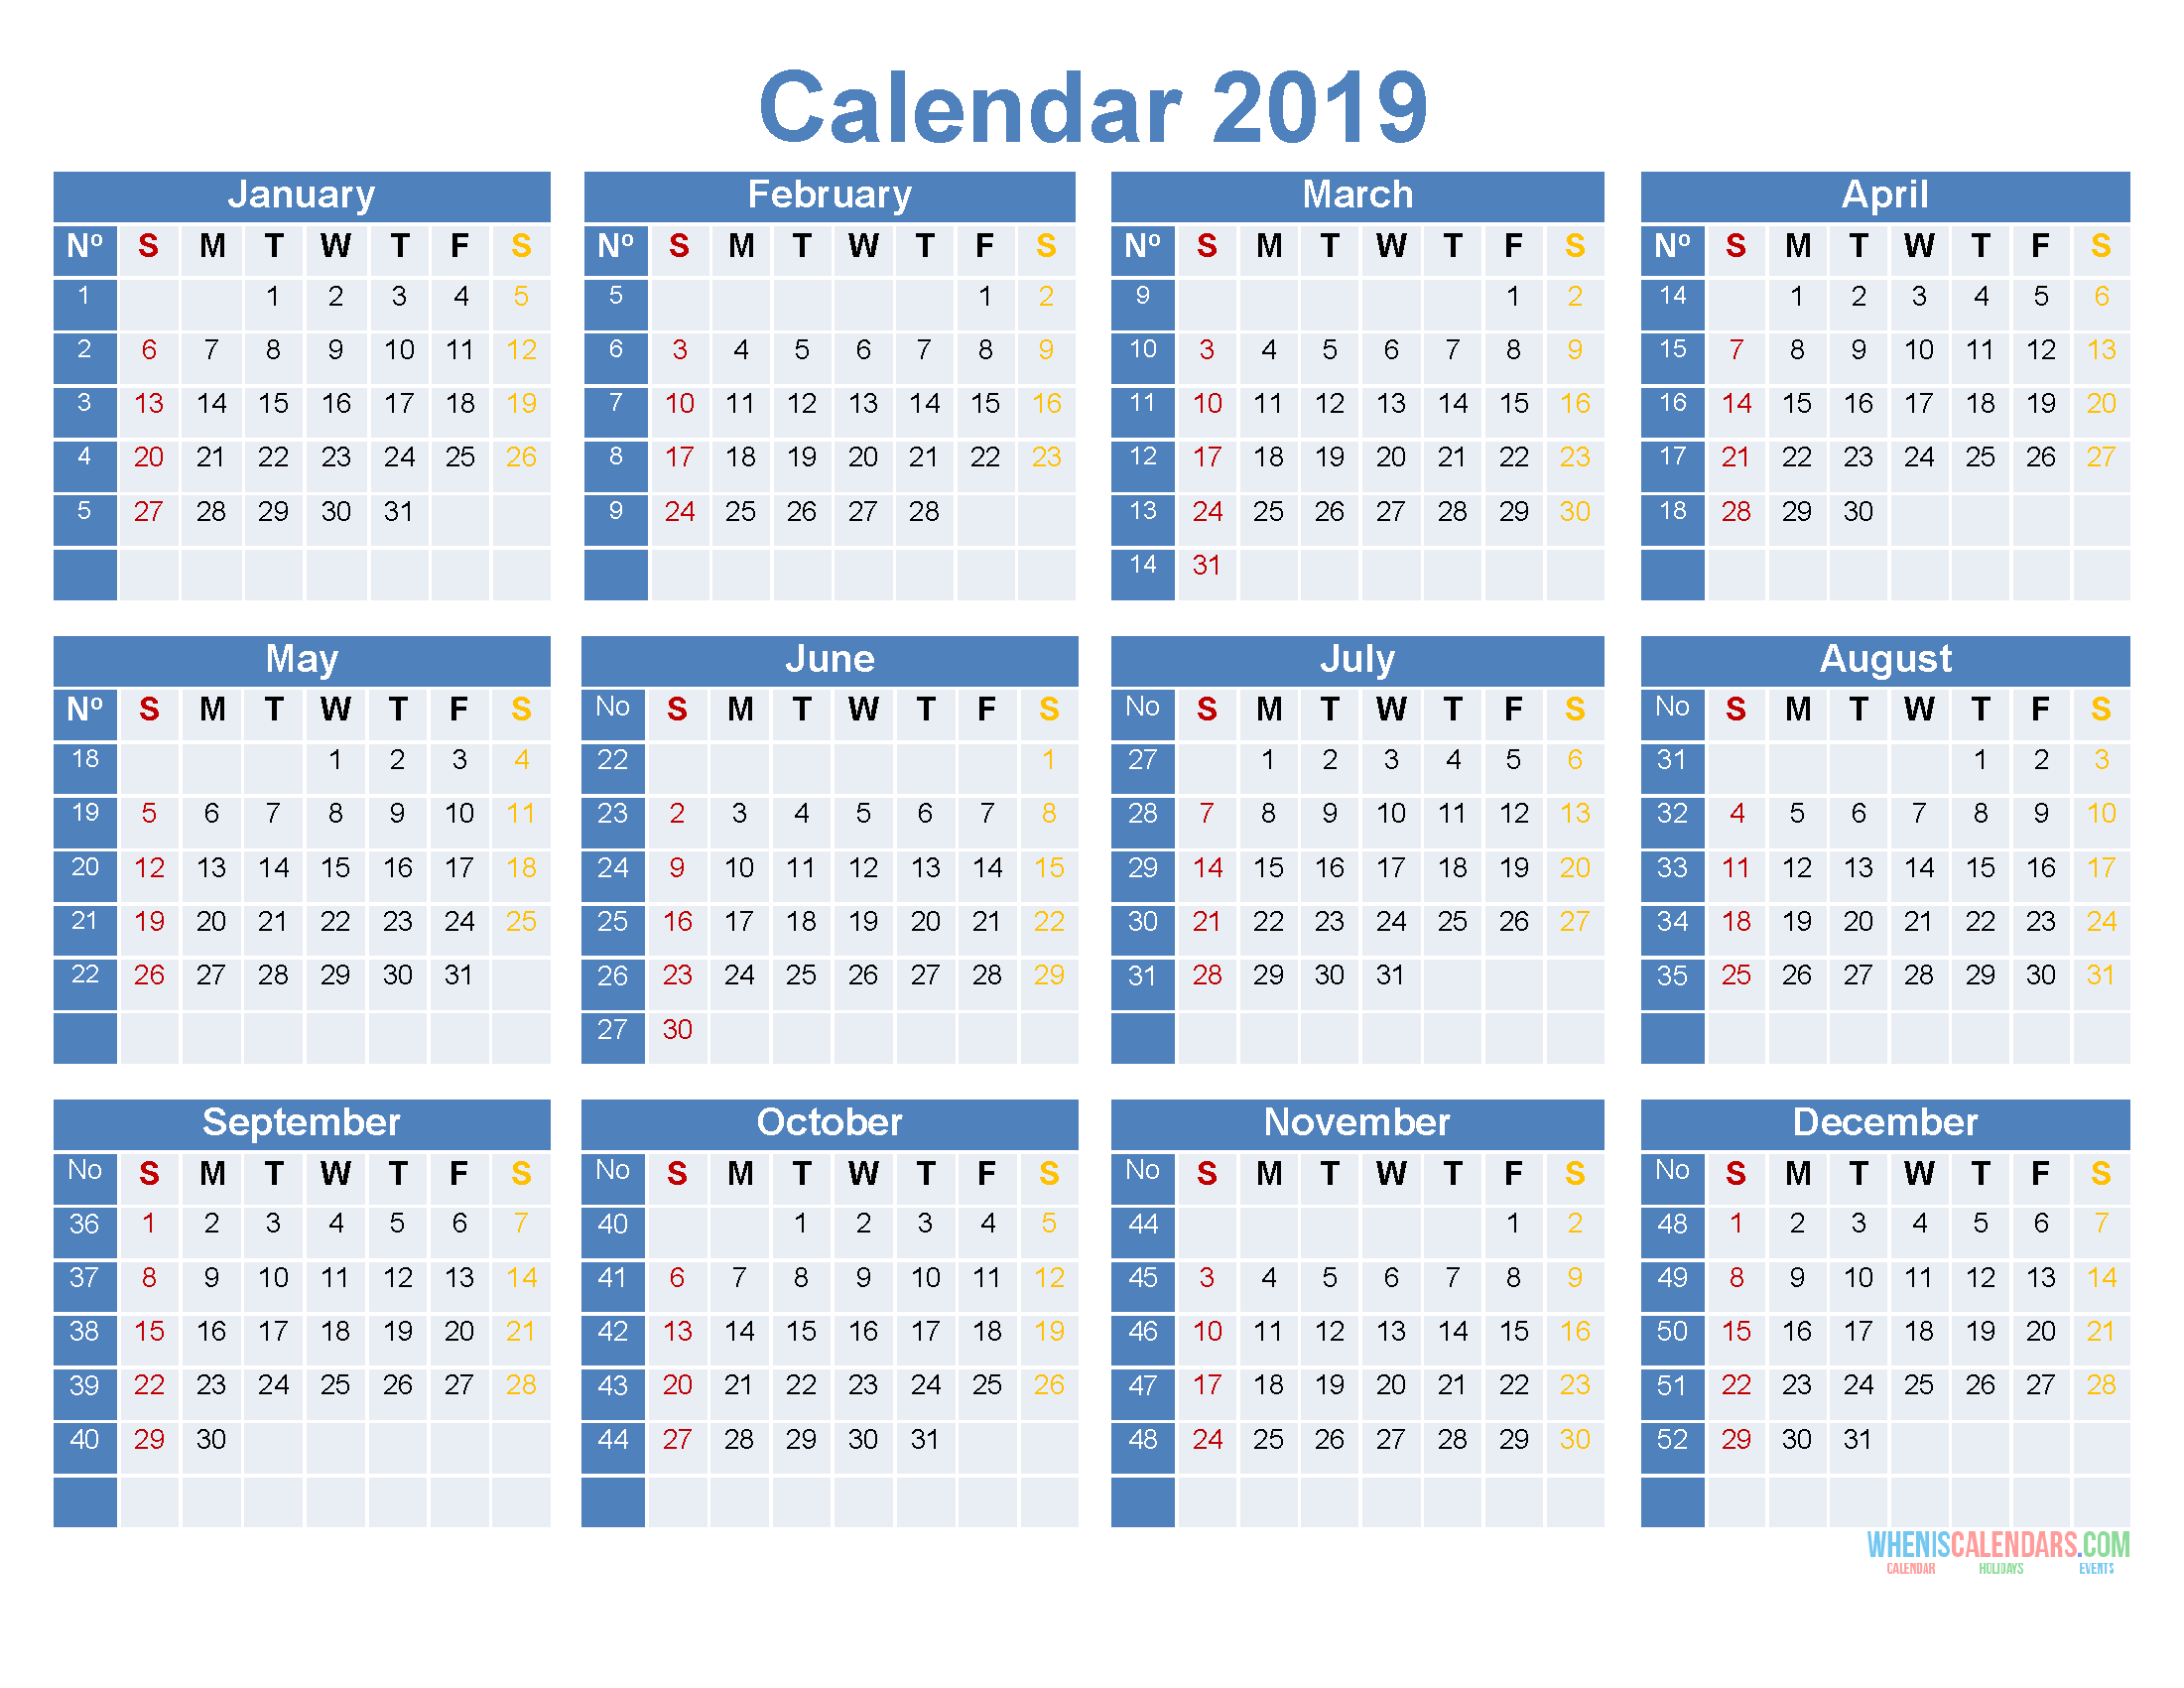 full-year-calendar-2019-printable-12-month-on-1-page-us-edition